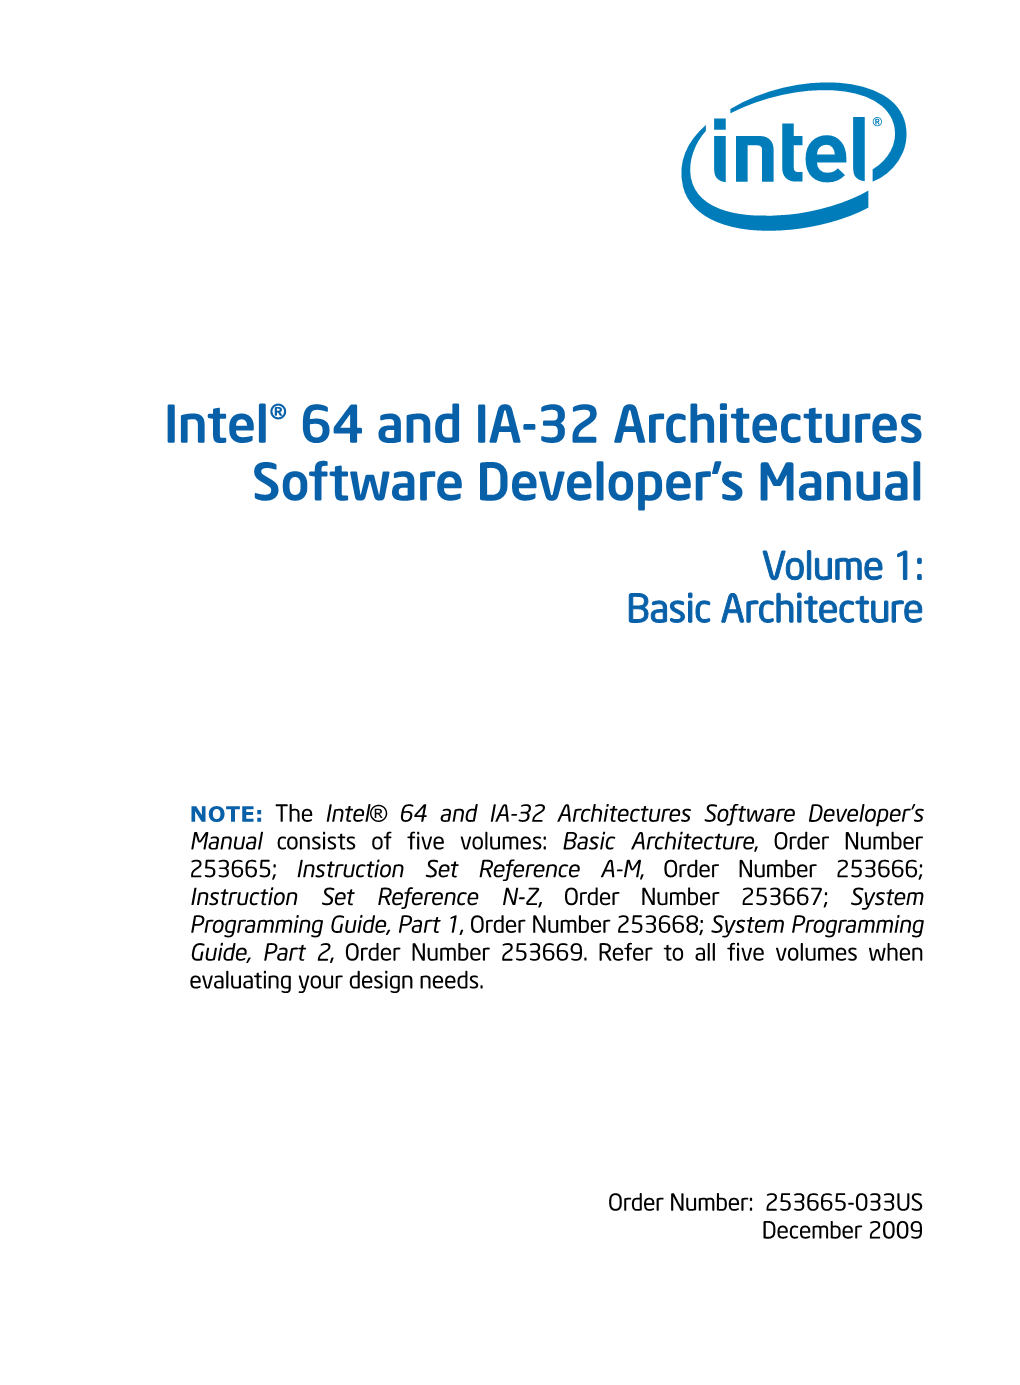 Intel(R) 64 and IA-32 Architectures Software Developer's Manual